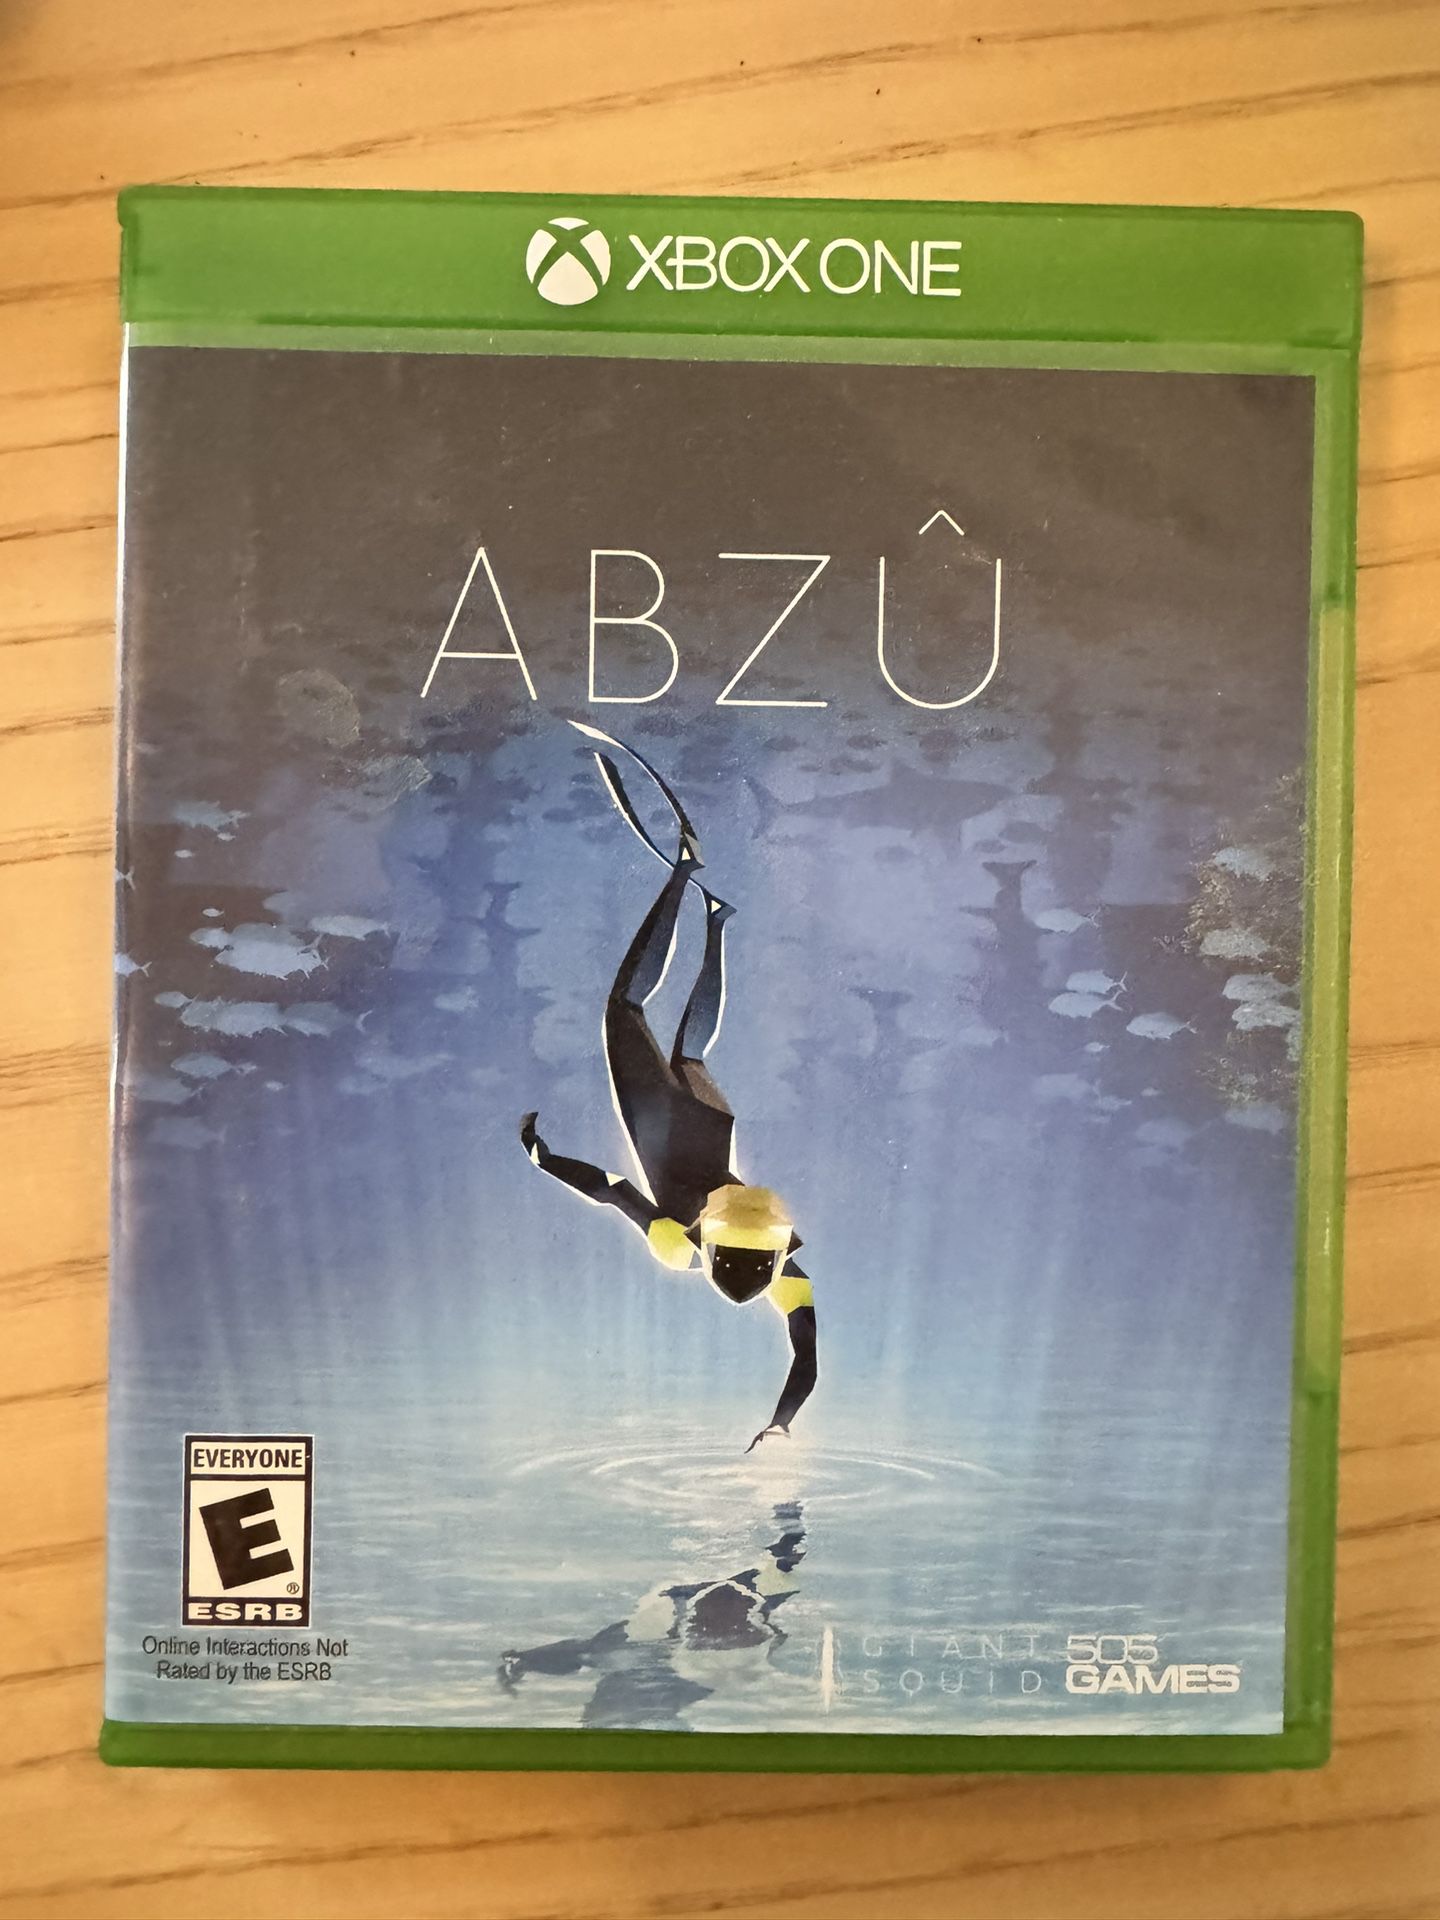  Abzu Game For Xbox One 